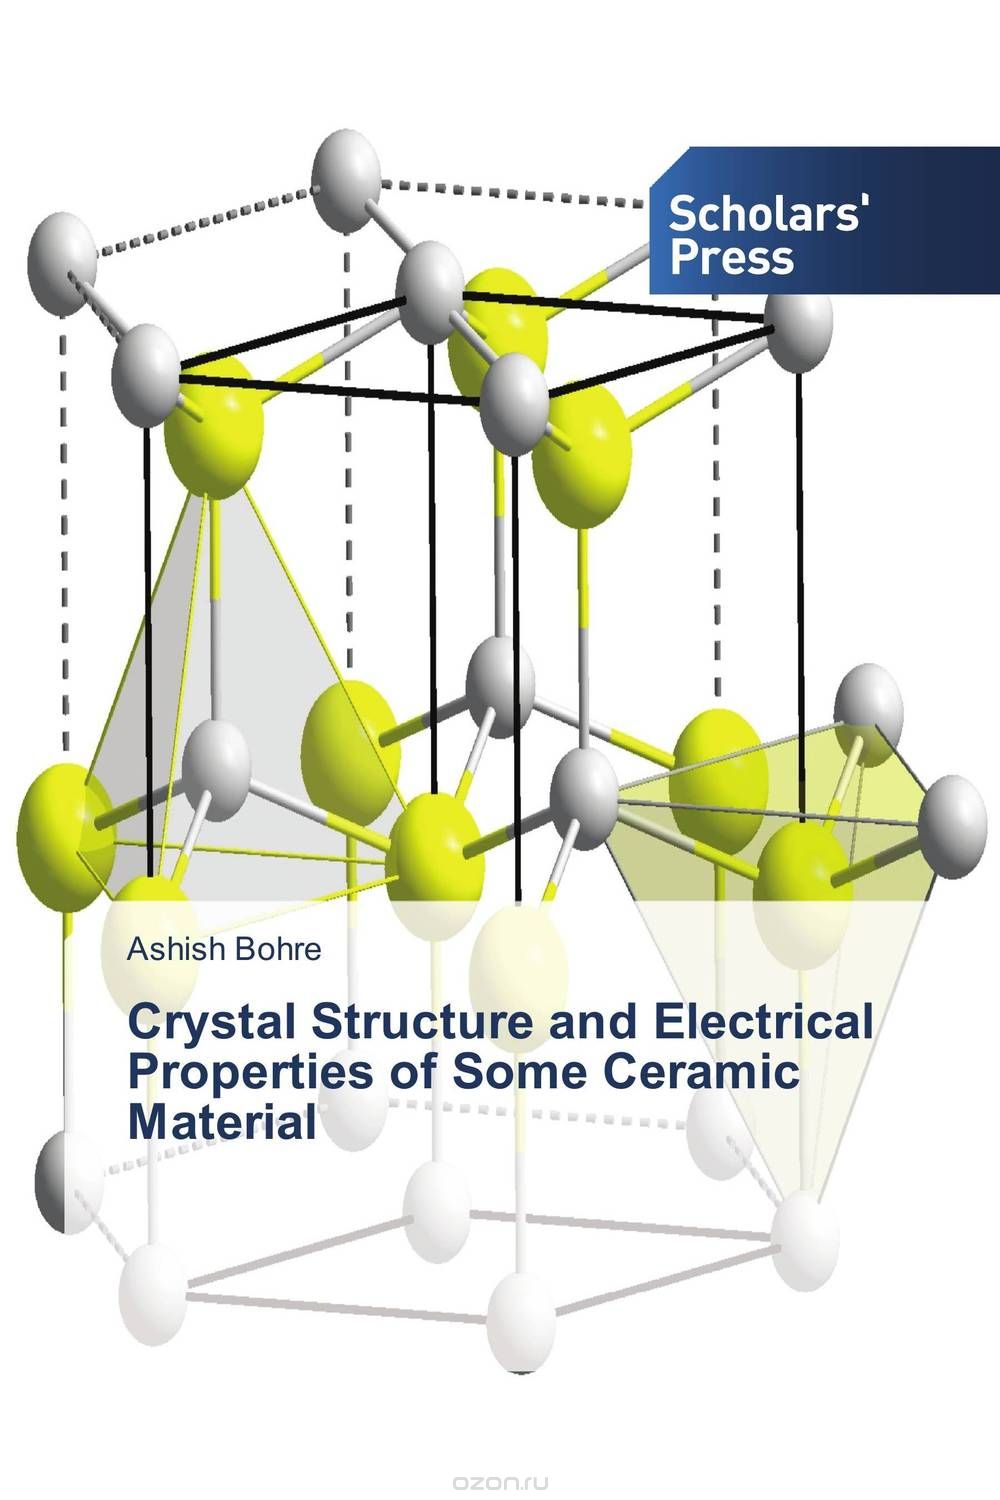 Скачать книгу "Crystal Structure and Electrical Properties of Some Ceramic Material"